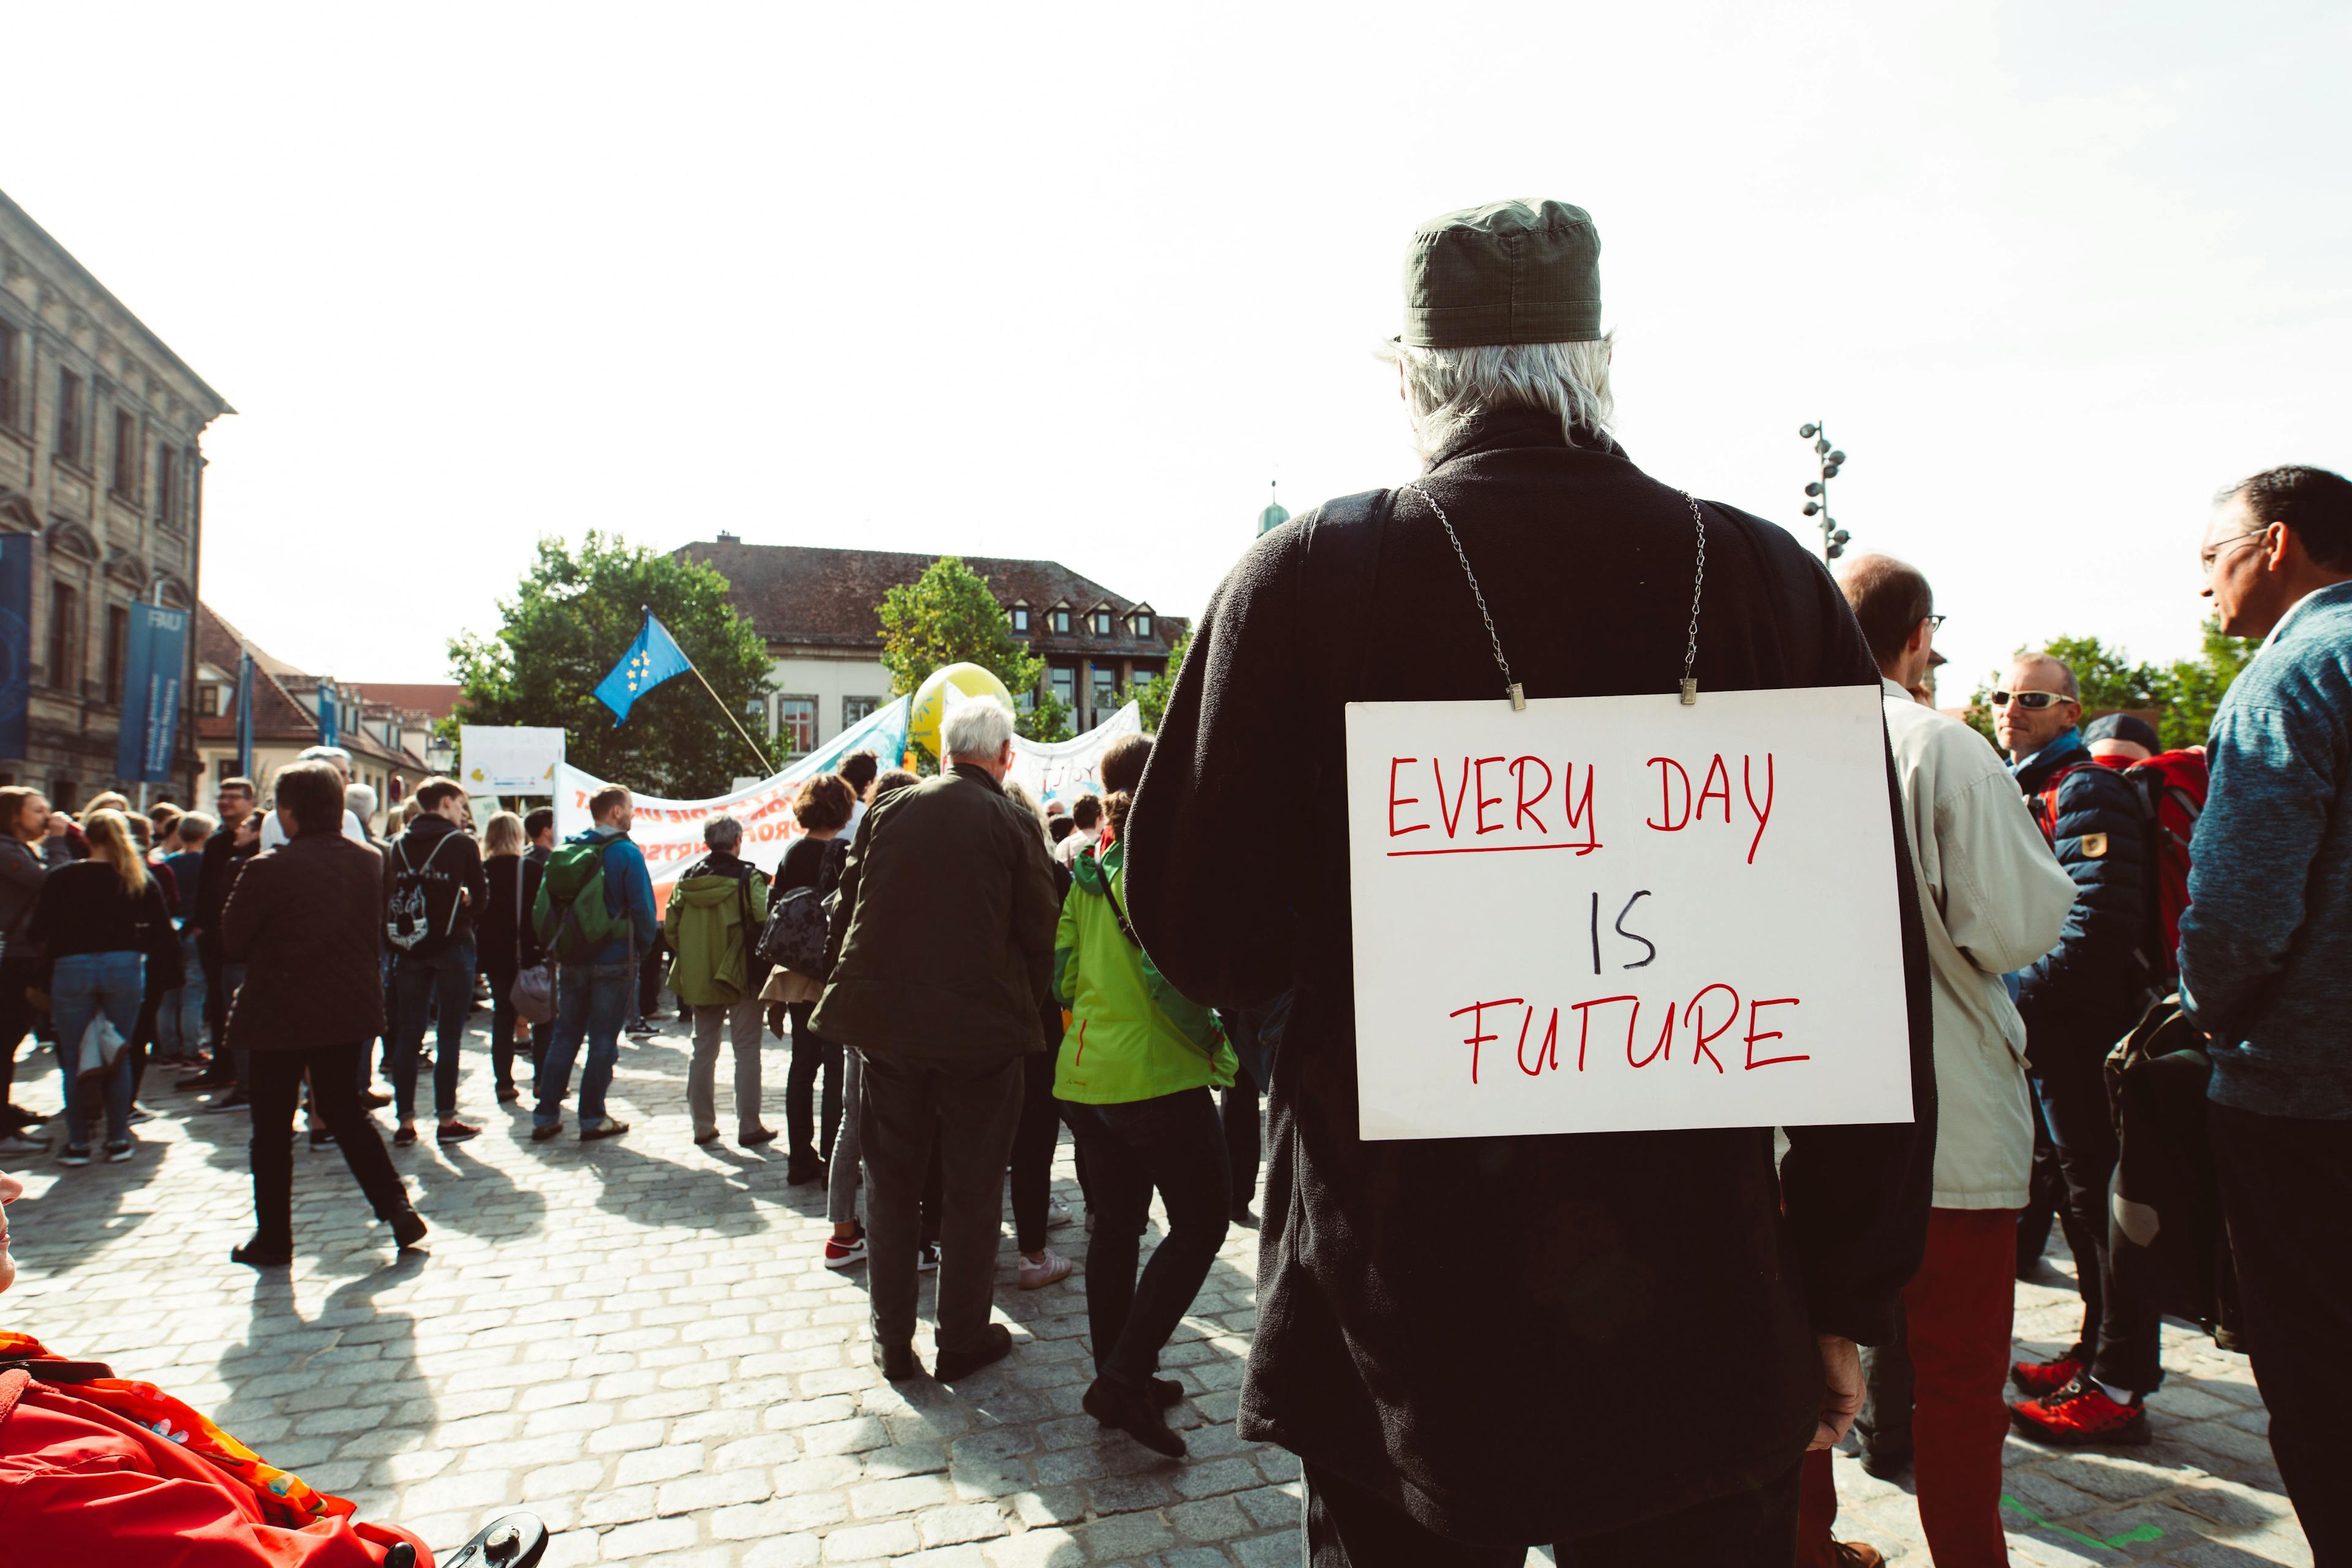 Everyday is future